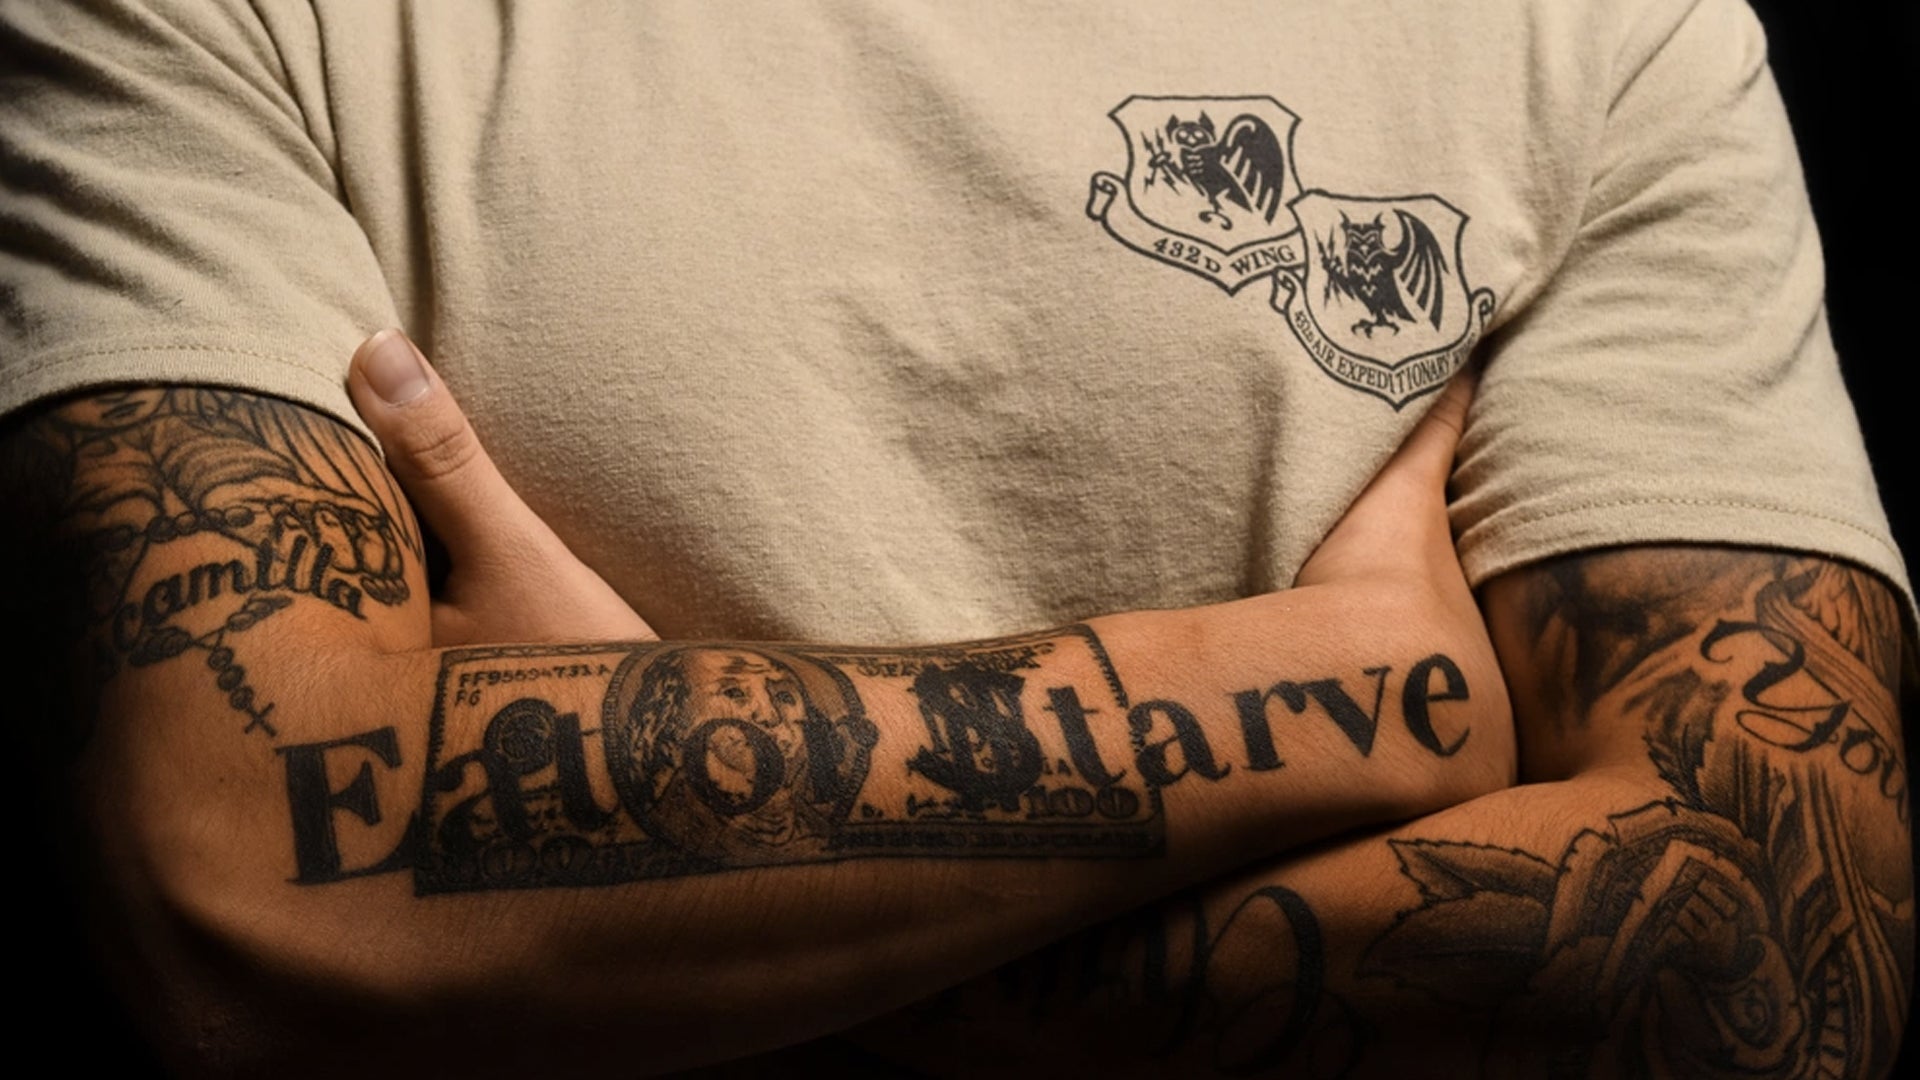 Air Force's top recruiter personally reviews hand tattoos now